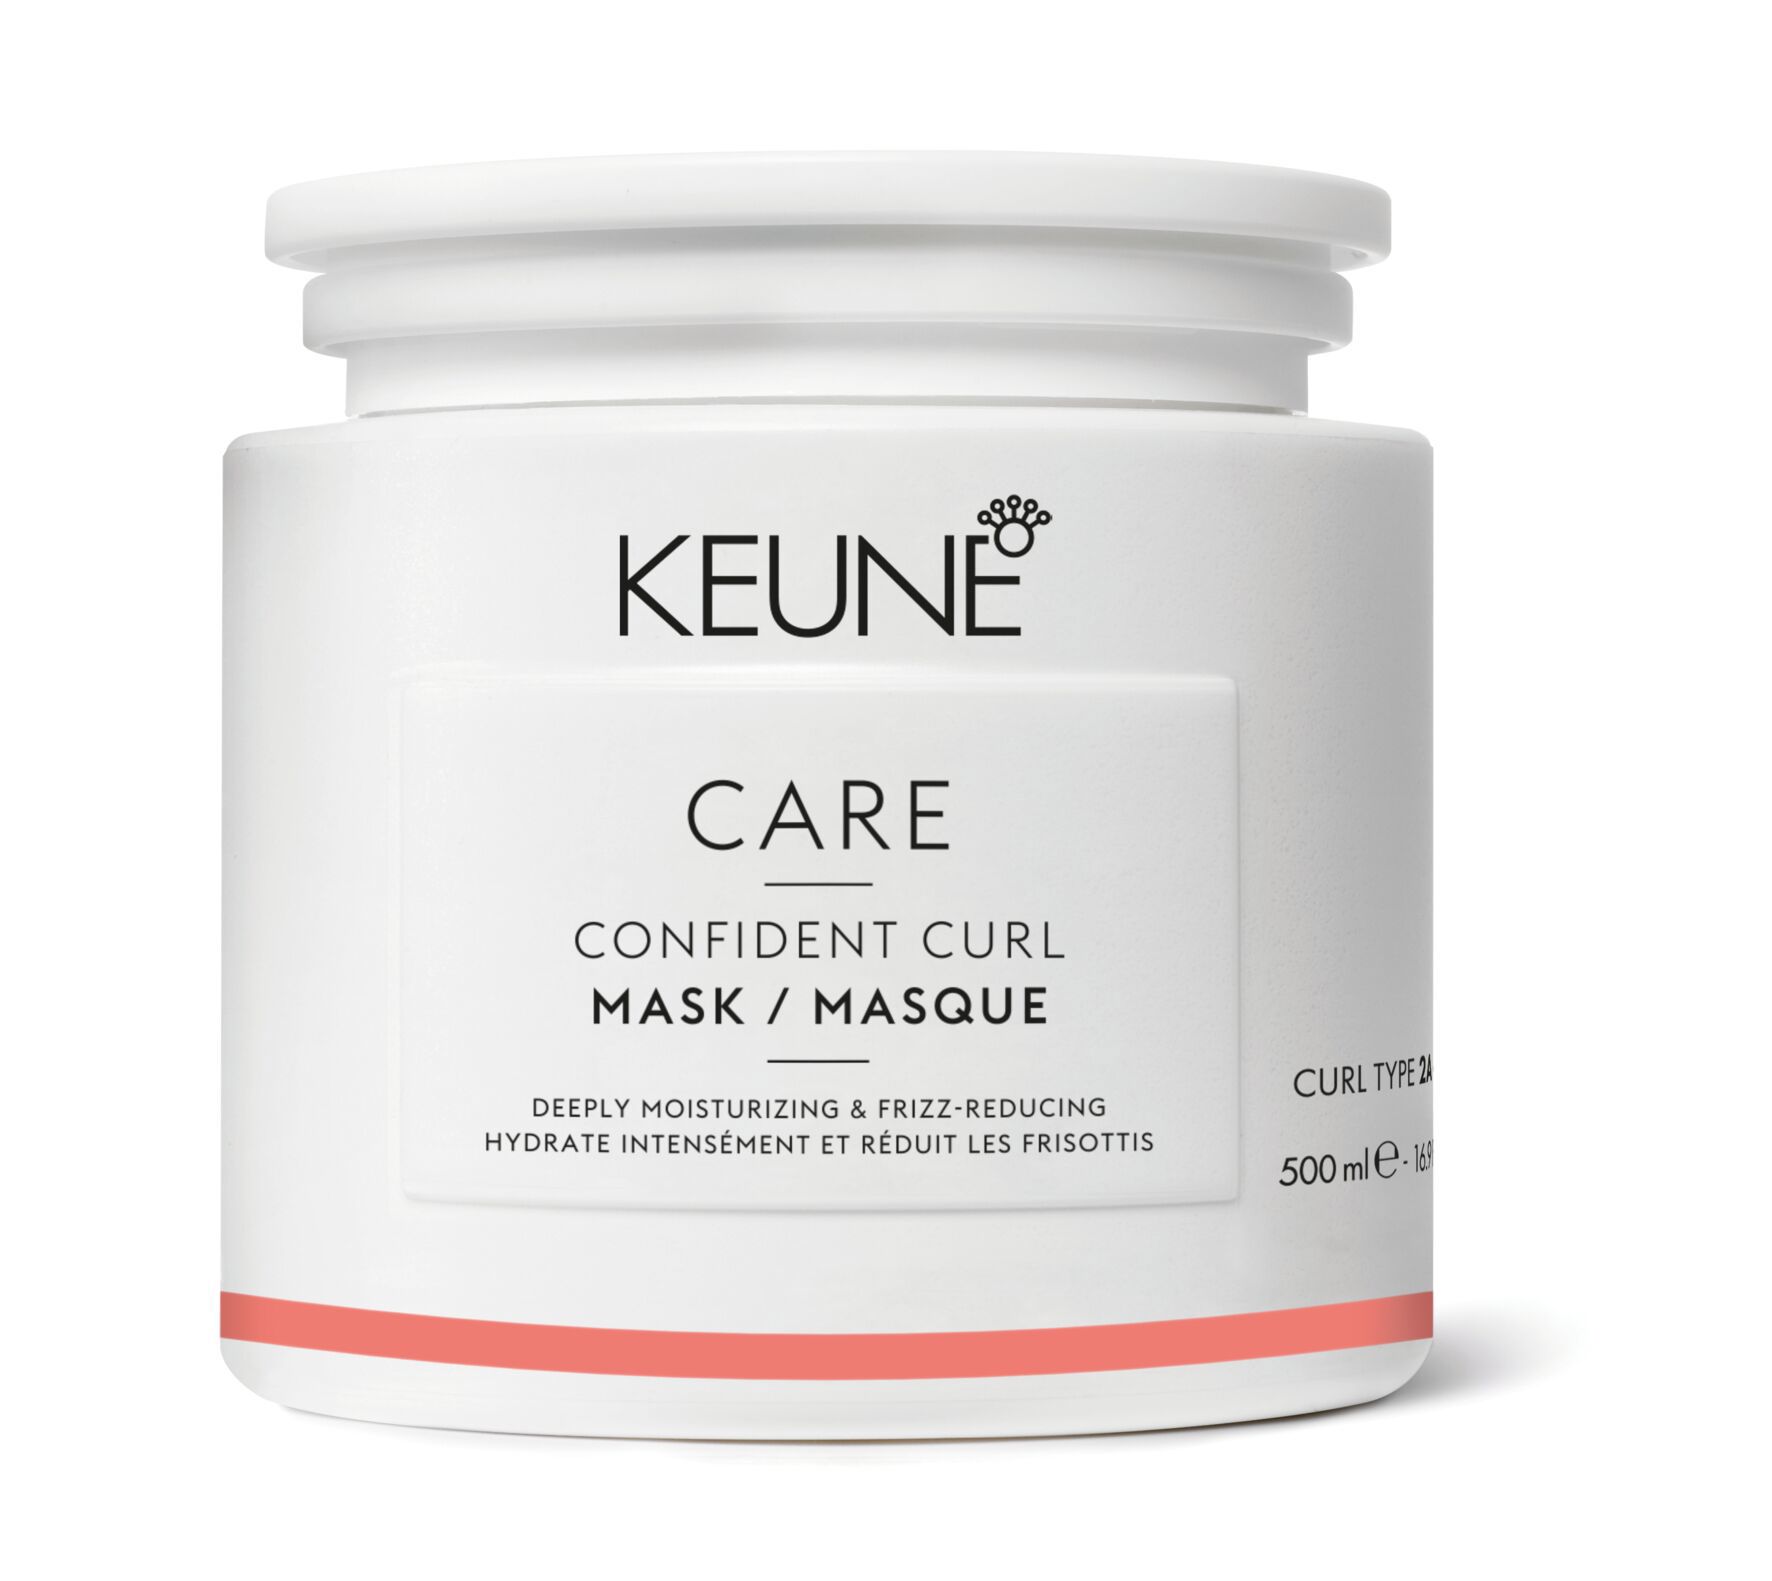 Confident Curl Mask is an excellent hair mask designed to moisturize curly hair. It works to transform your curls, offering deep conditioning for smooth, frizz-free hair. You can find it on keune.ch.